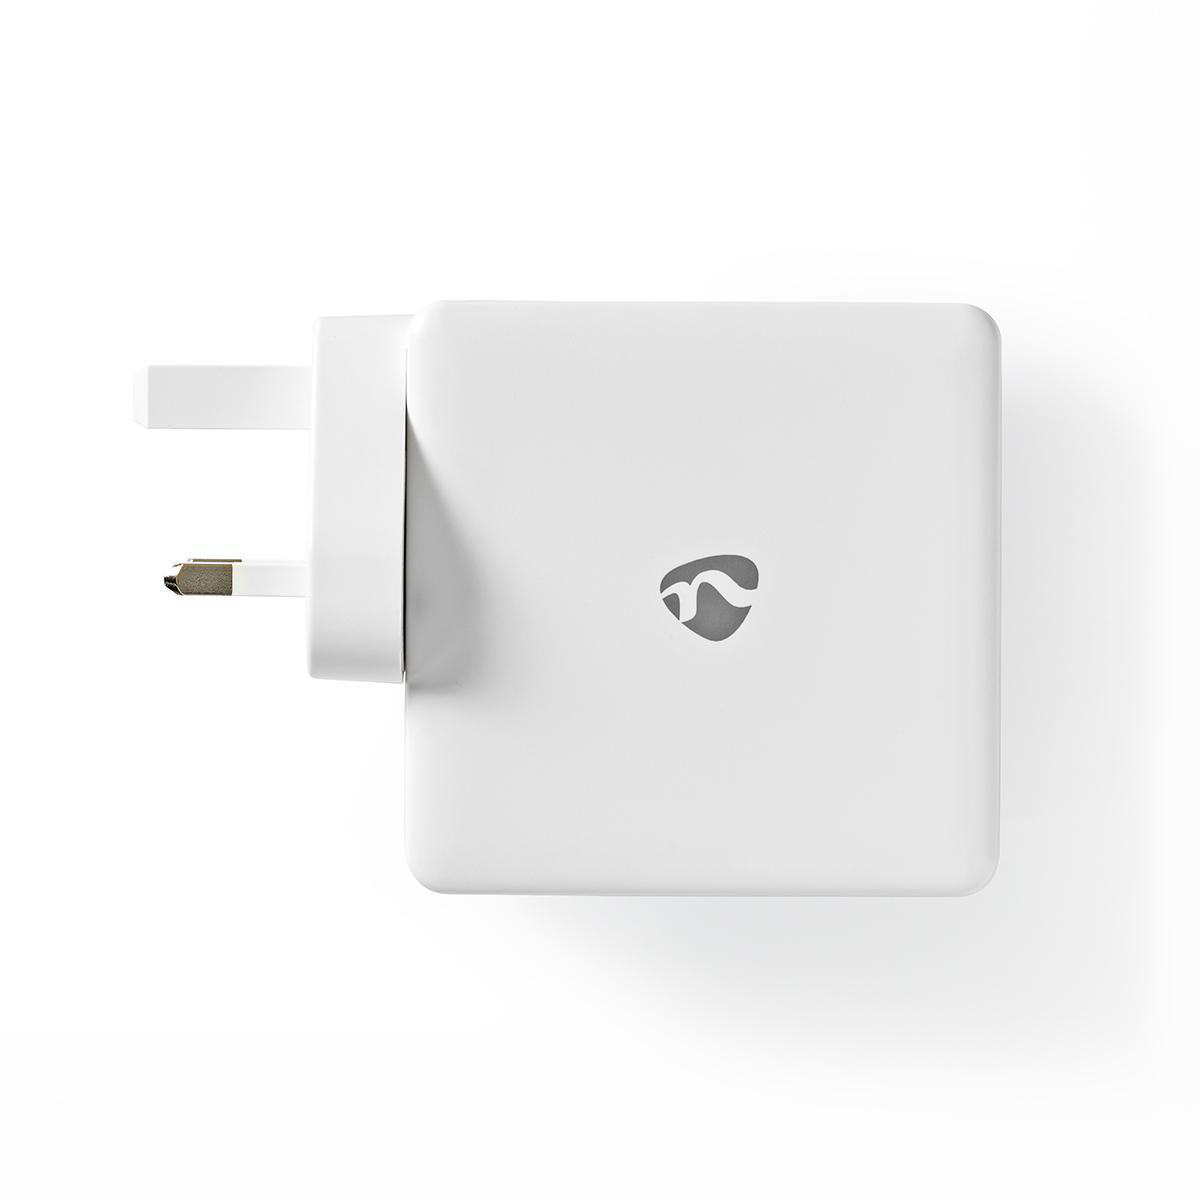 Nedis Quick Wall Charger – 65W – 2 x USB-C Output